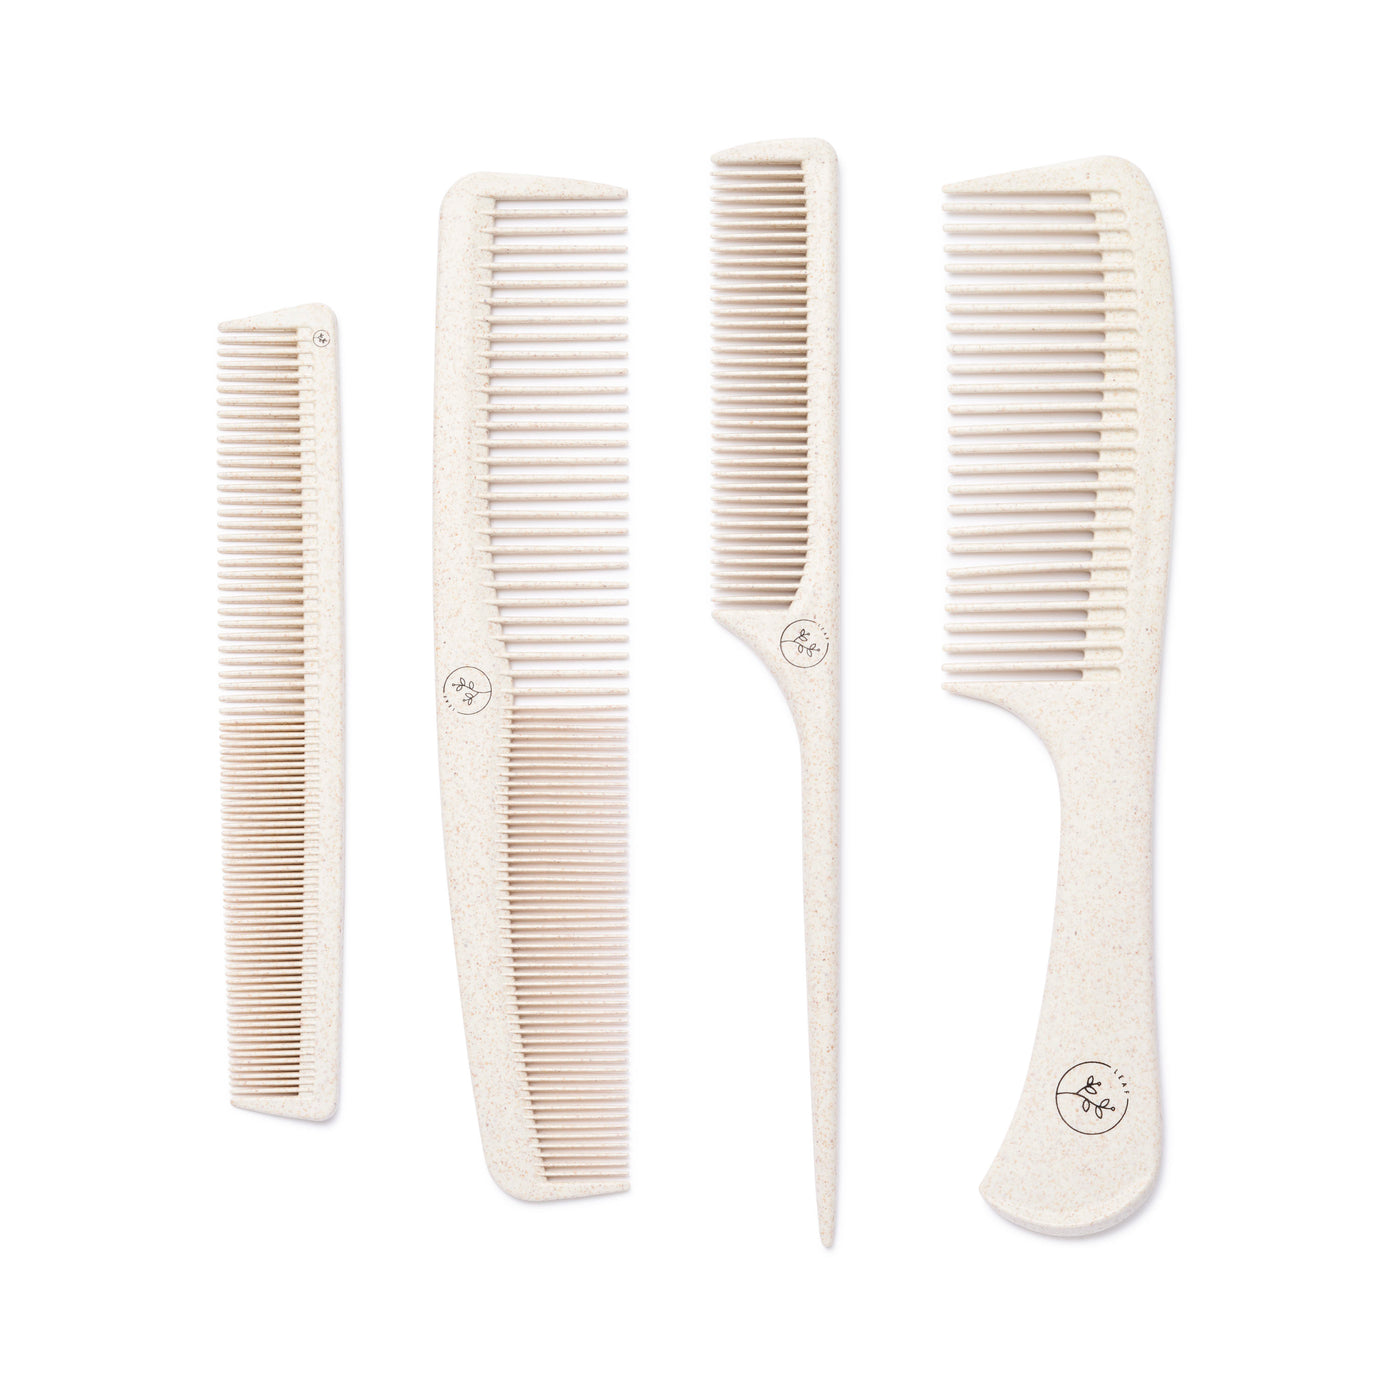 The Complete Combs Set